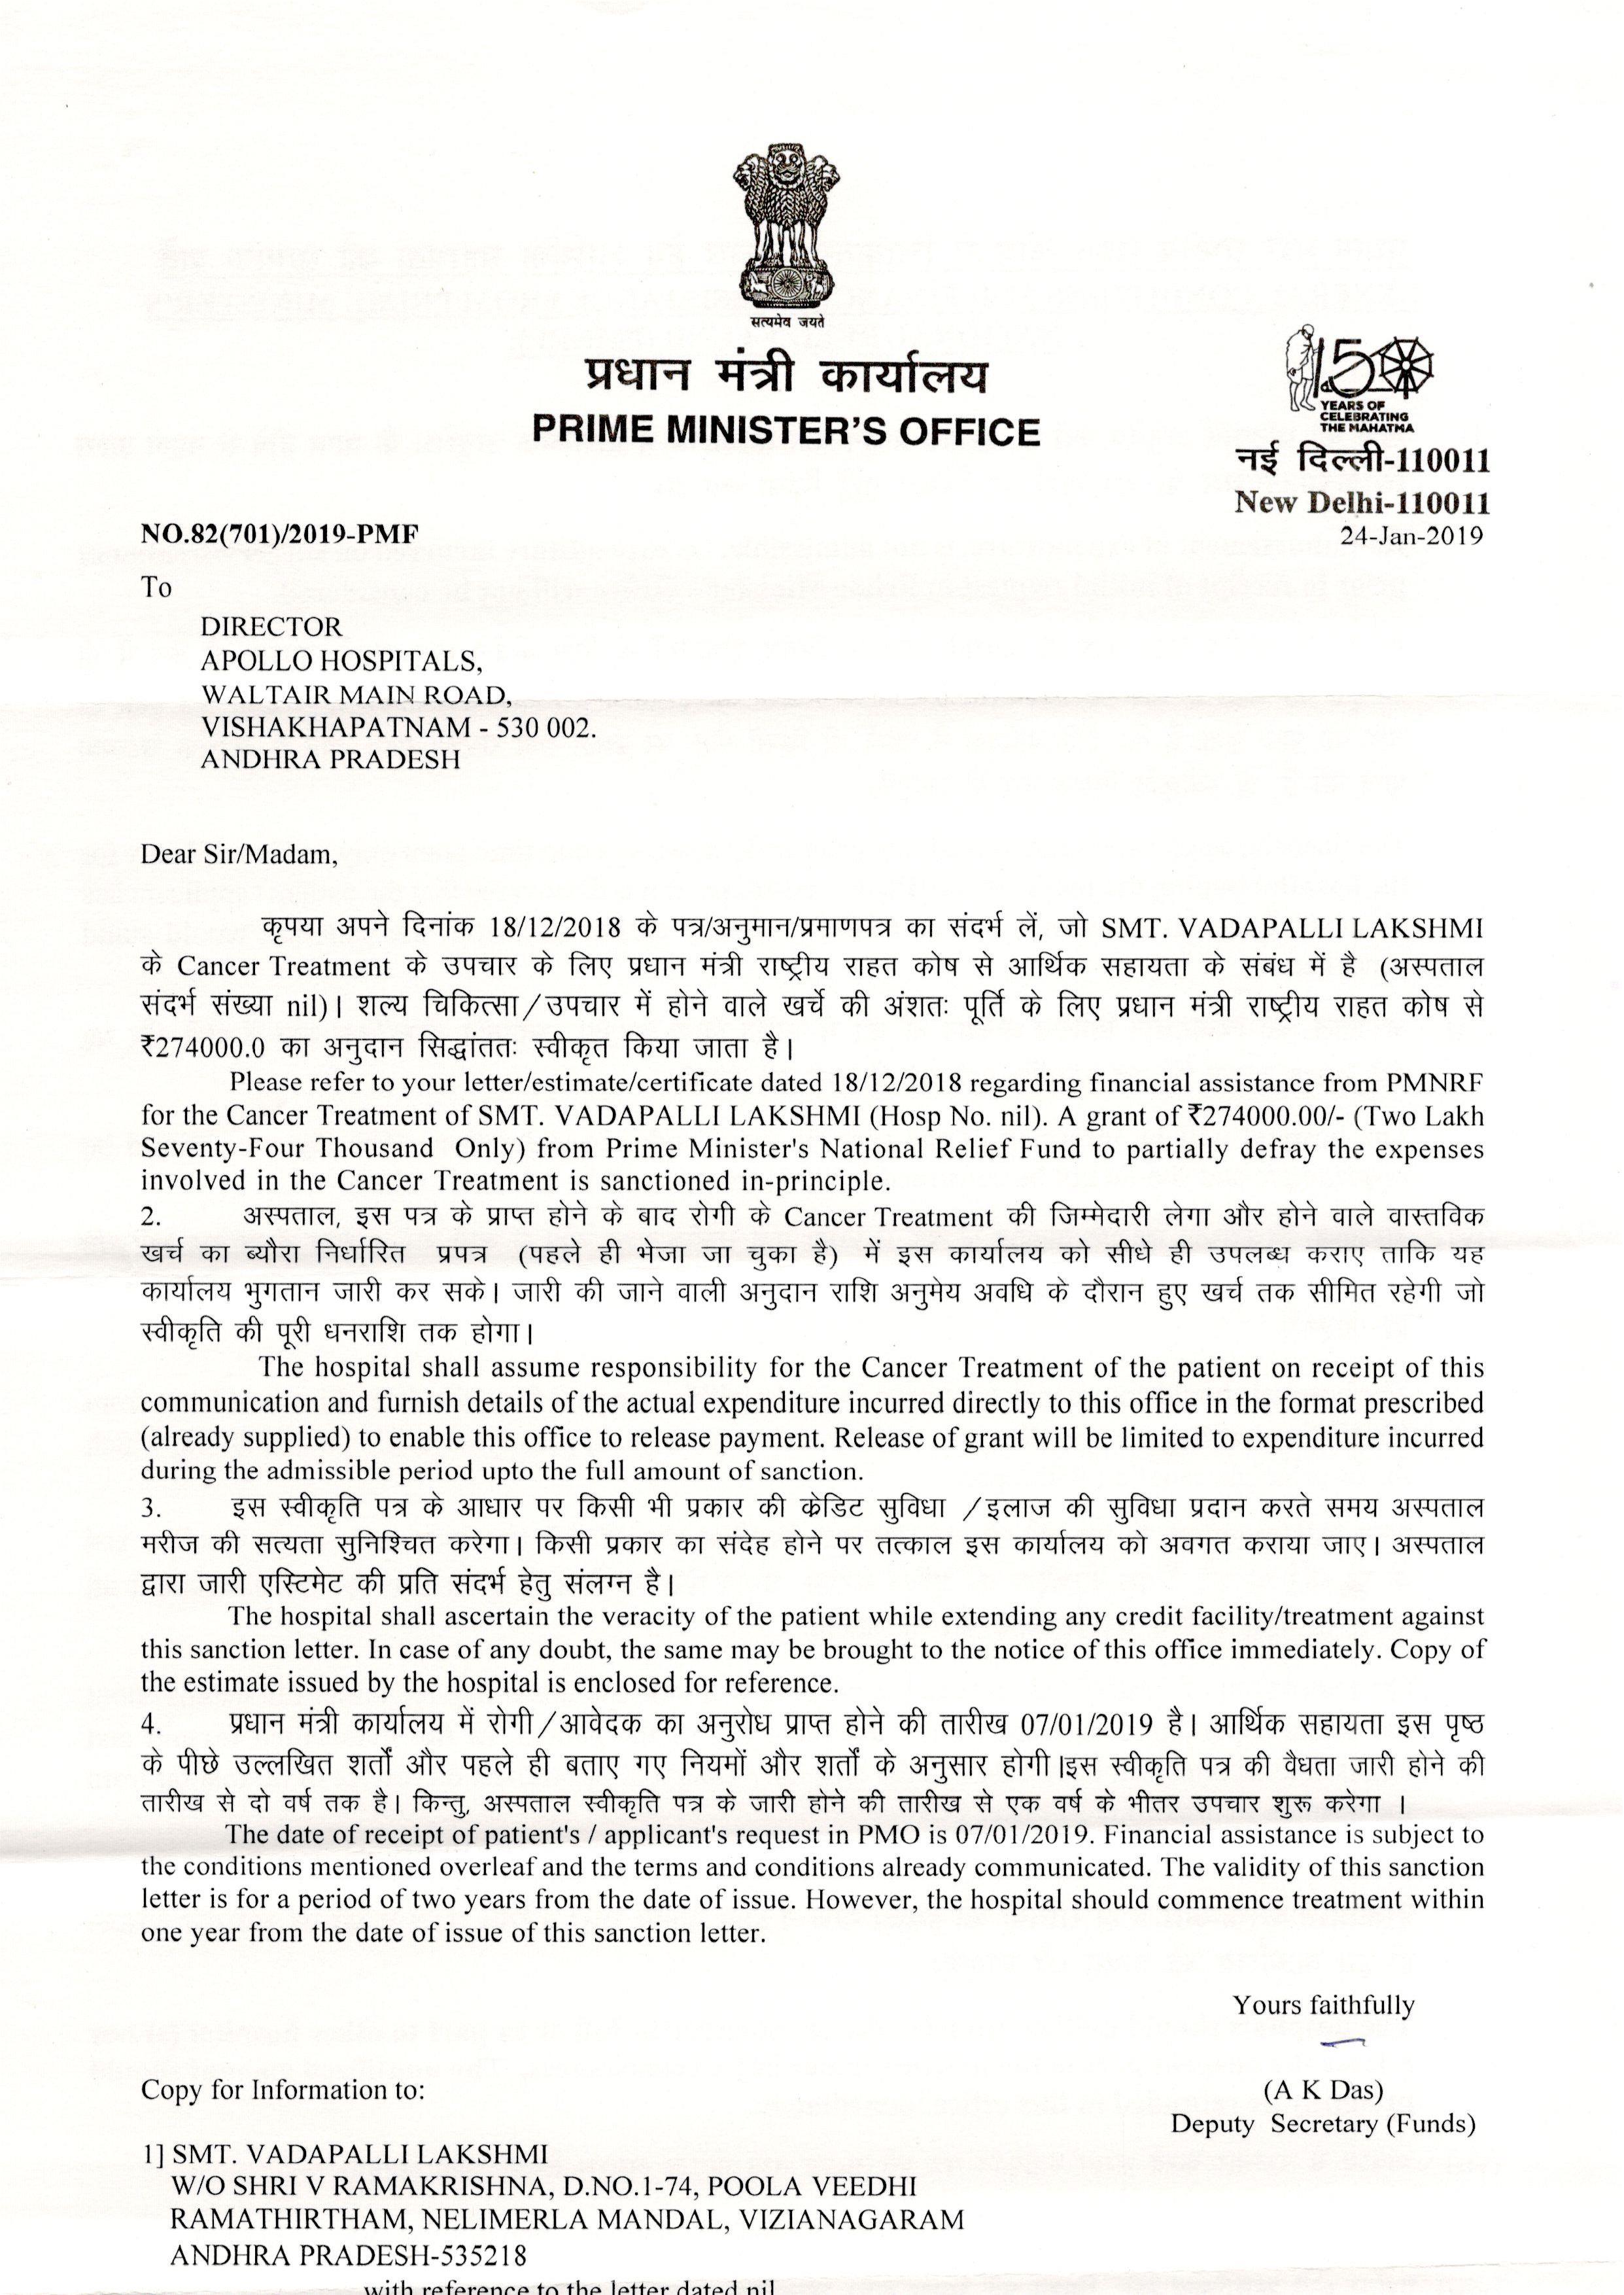 two letters received from Govt. of India in response